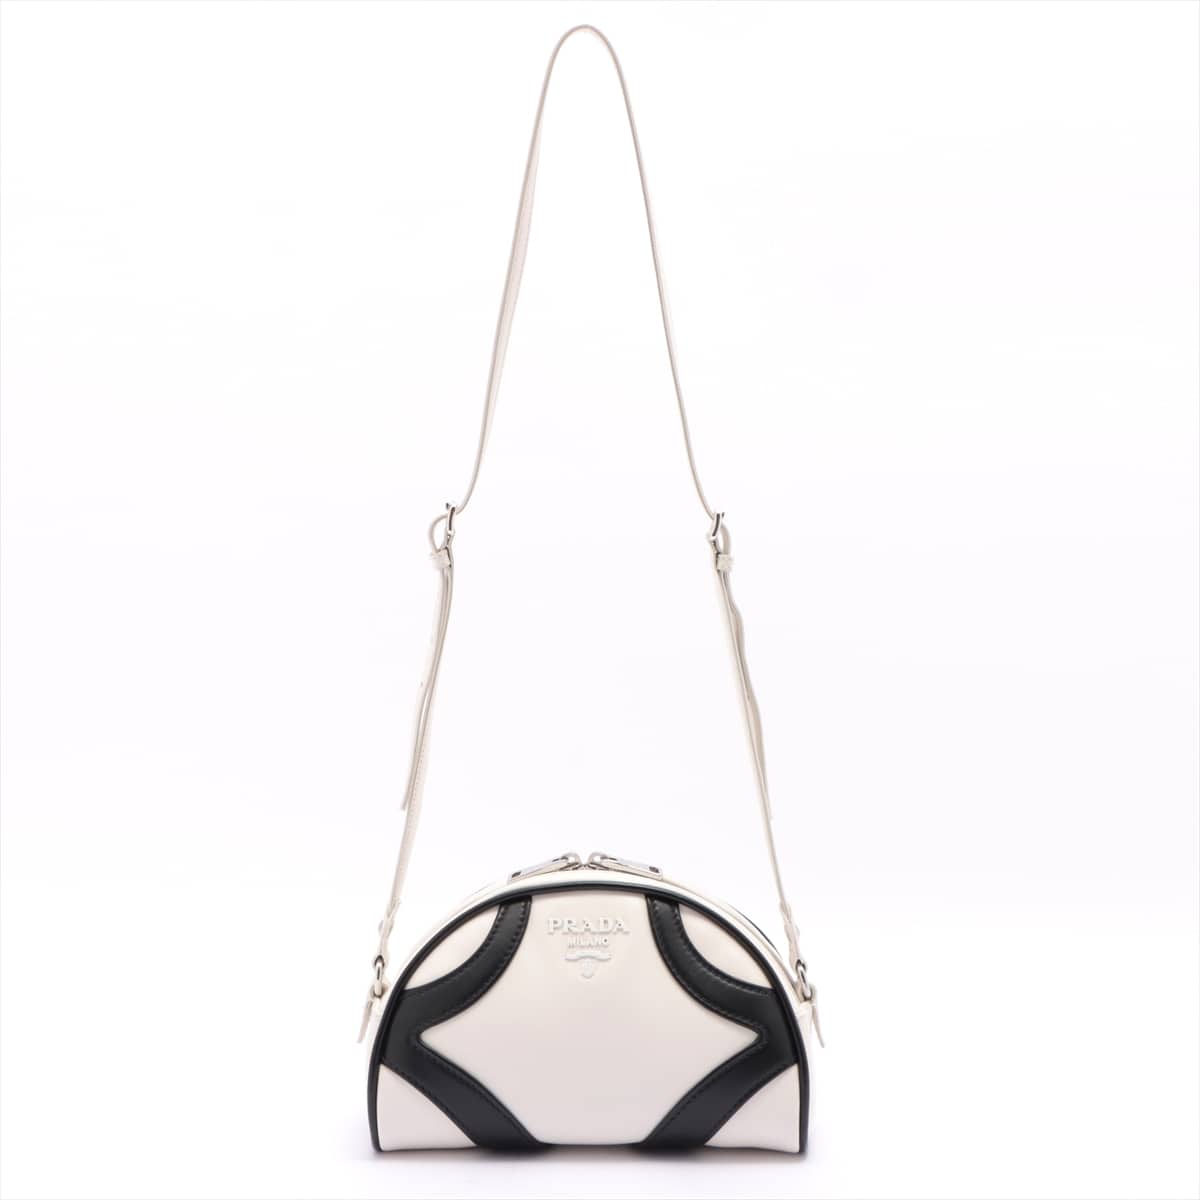 Prada Leather Shoulder bag White 1BH140 1BH140 open papers